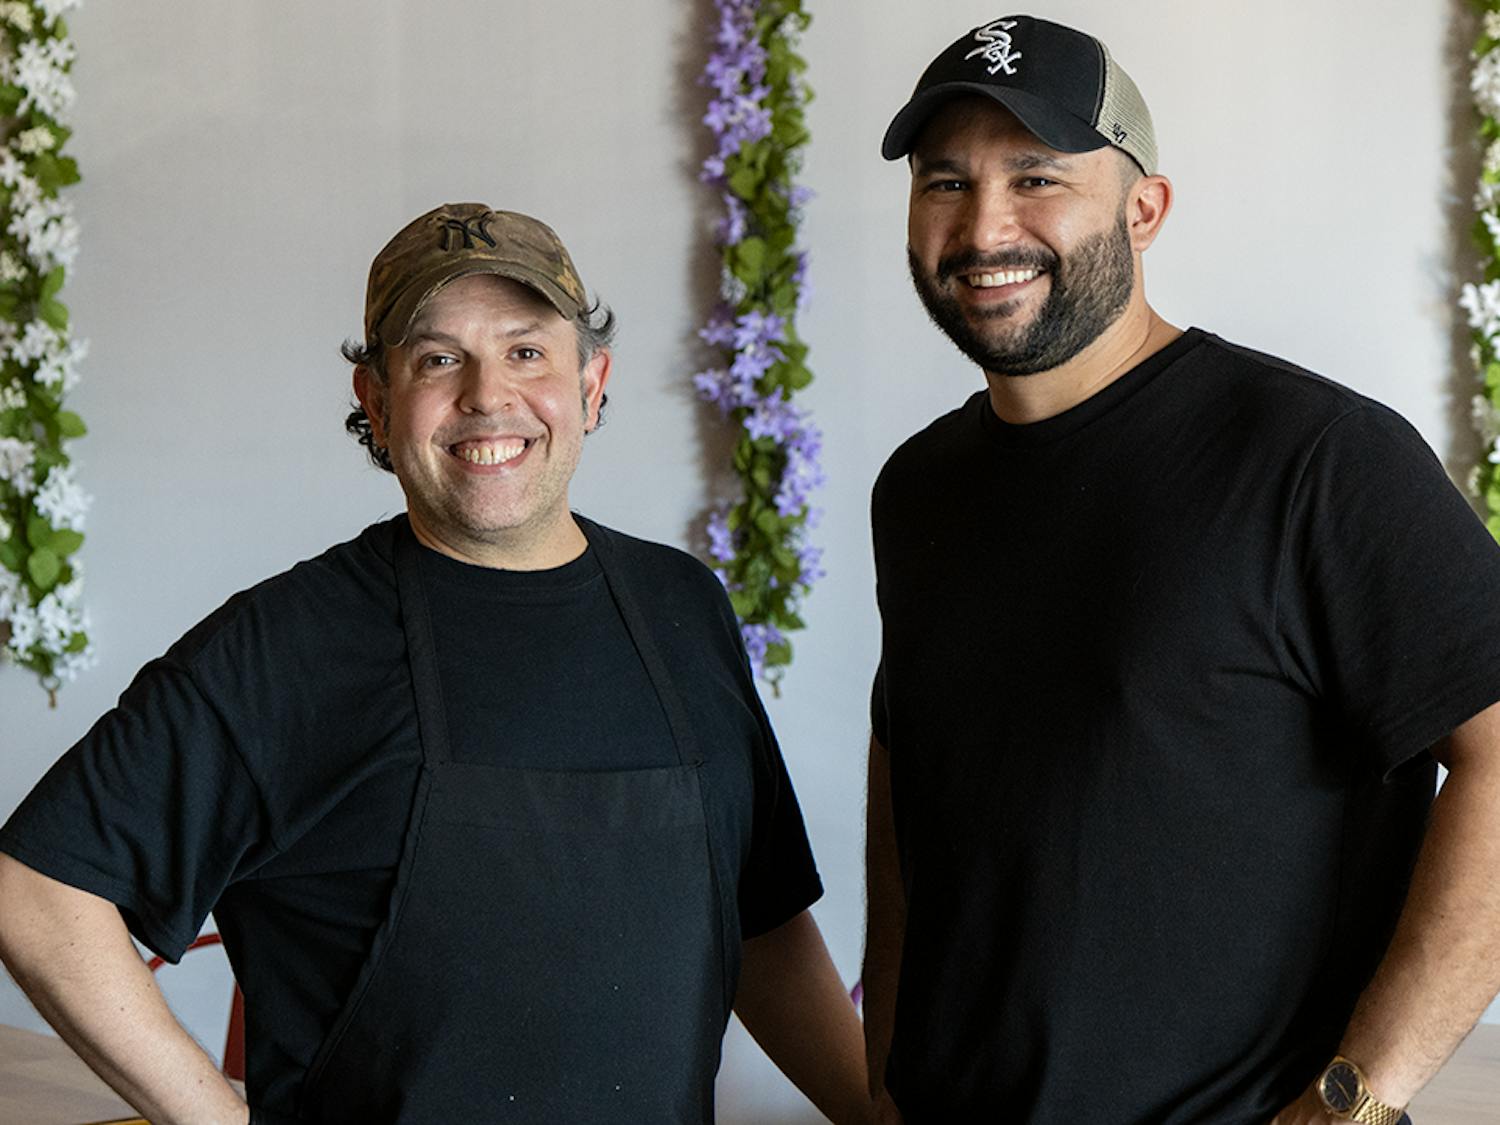 David Grillo (left) and Adam Cabot (right), owners of Boca Grande Burritos in Forest Acres. The restaurant's menu is built to be flexible, offering vegan, vegetarian and gluten-free options.